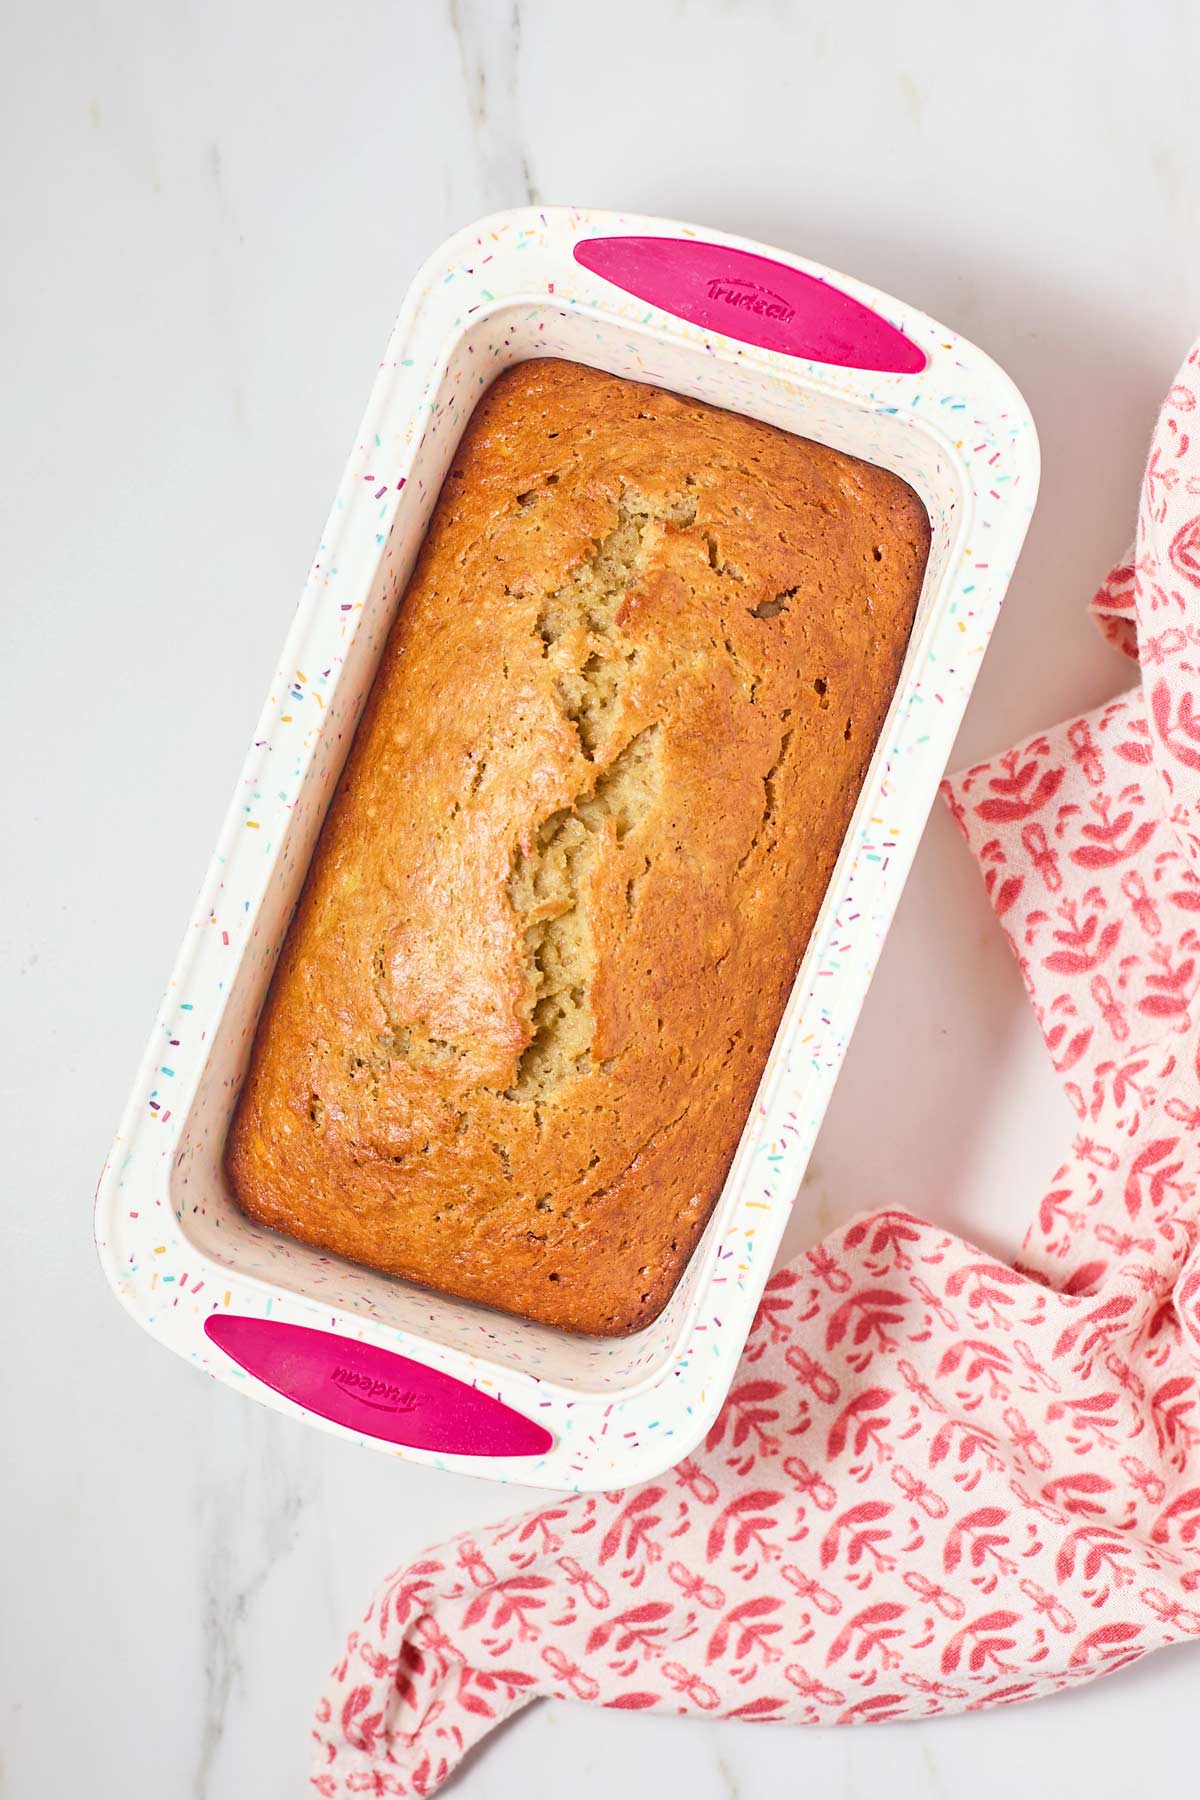 A freshly baked loaf of banana bread in a colorful speckled baking dish, placed on a marble surface next to a red patterned cloth.